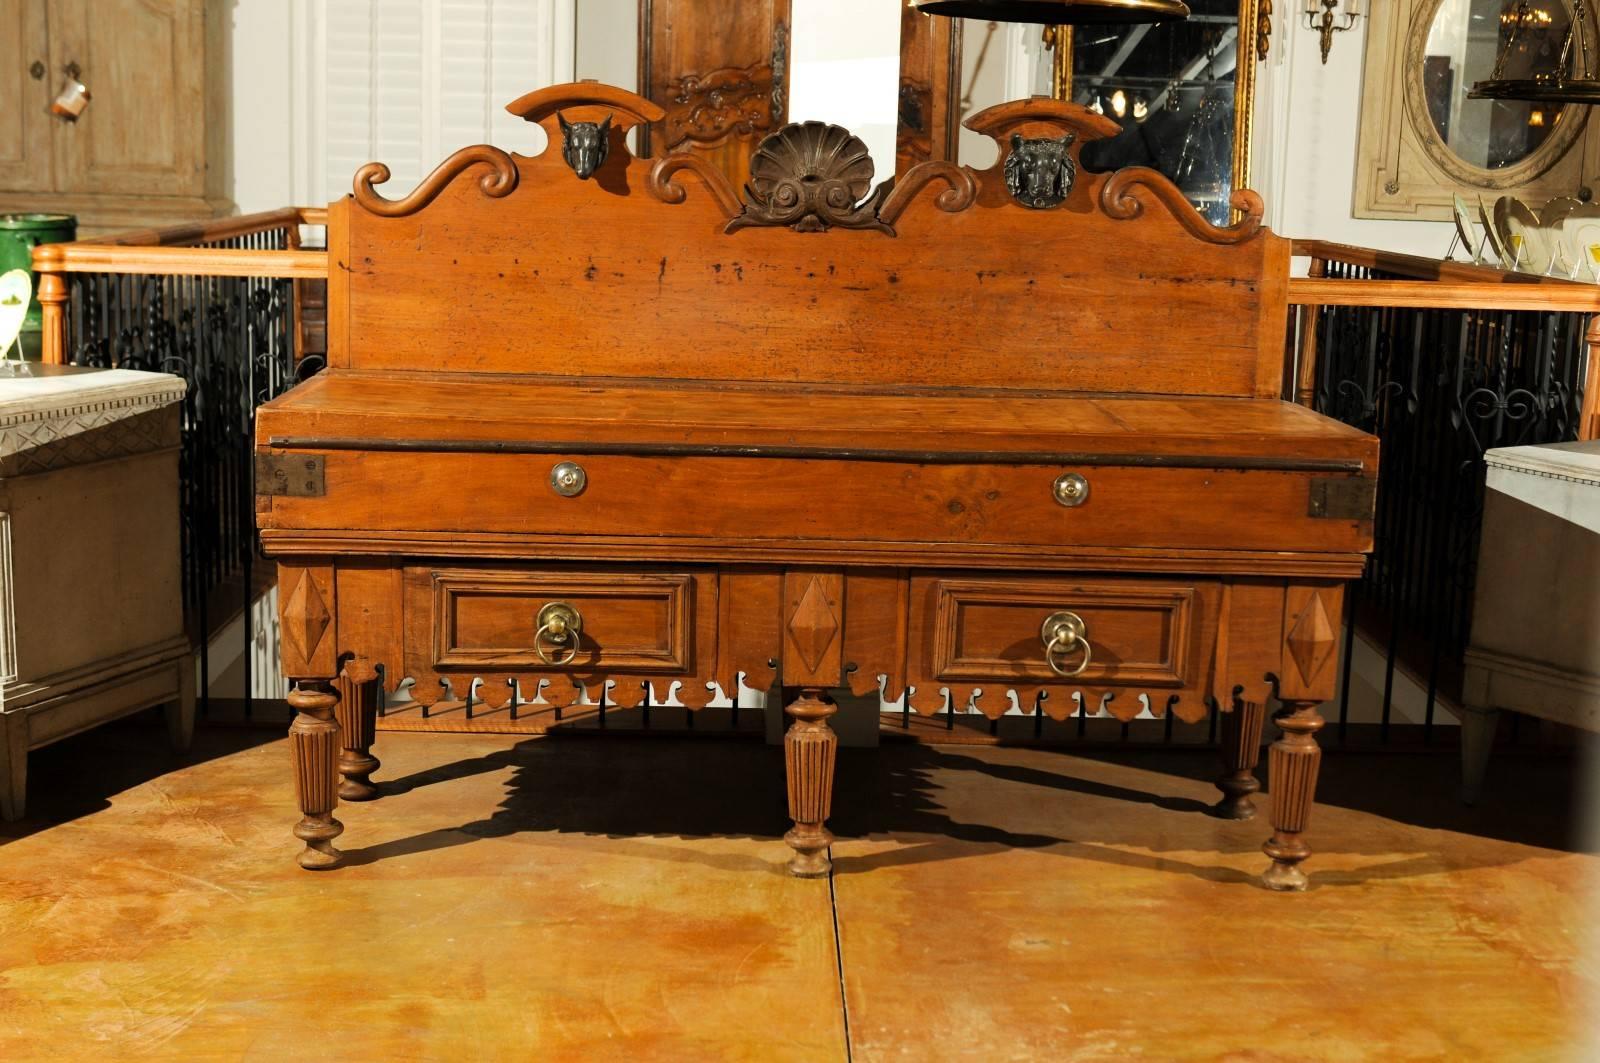 A French large-scale butcher's table with carved back, mounted steer heads and double knife slats from the late 19th century. This exquisite French butcher block features a nicely carved tall back, adorned in its central section with an iron shell,